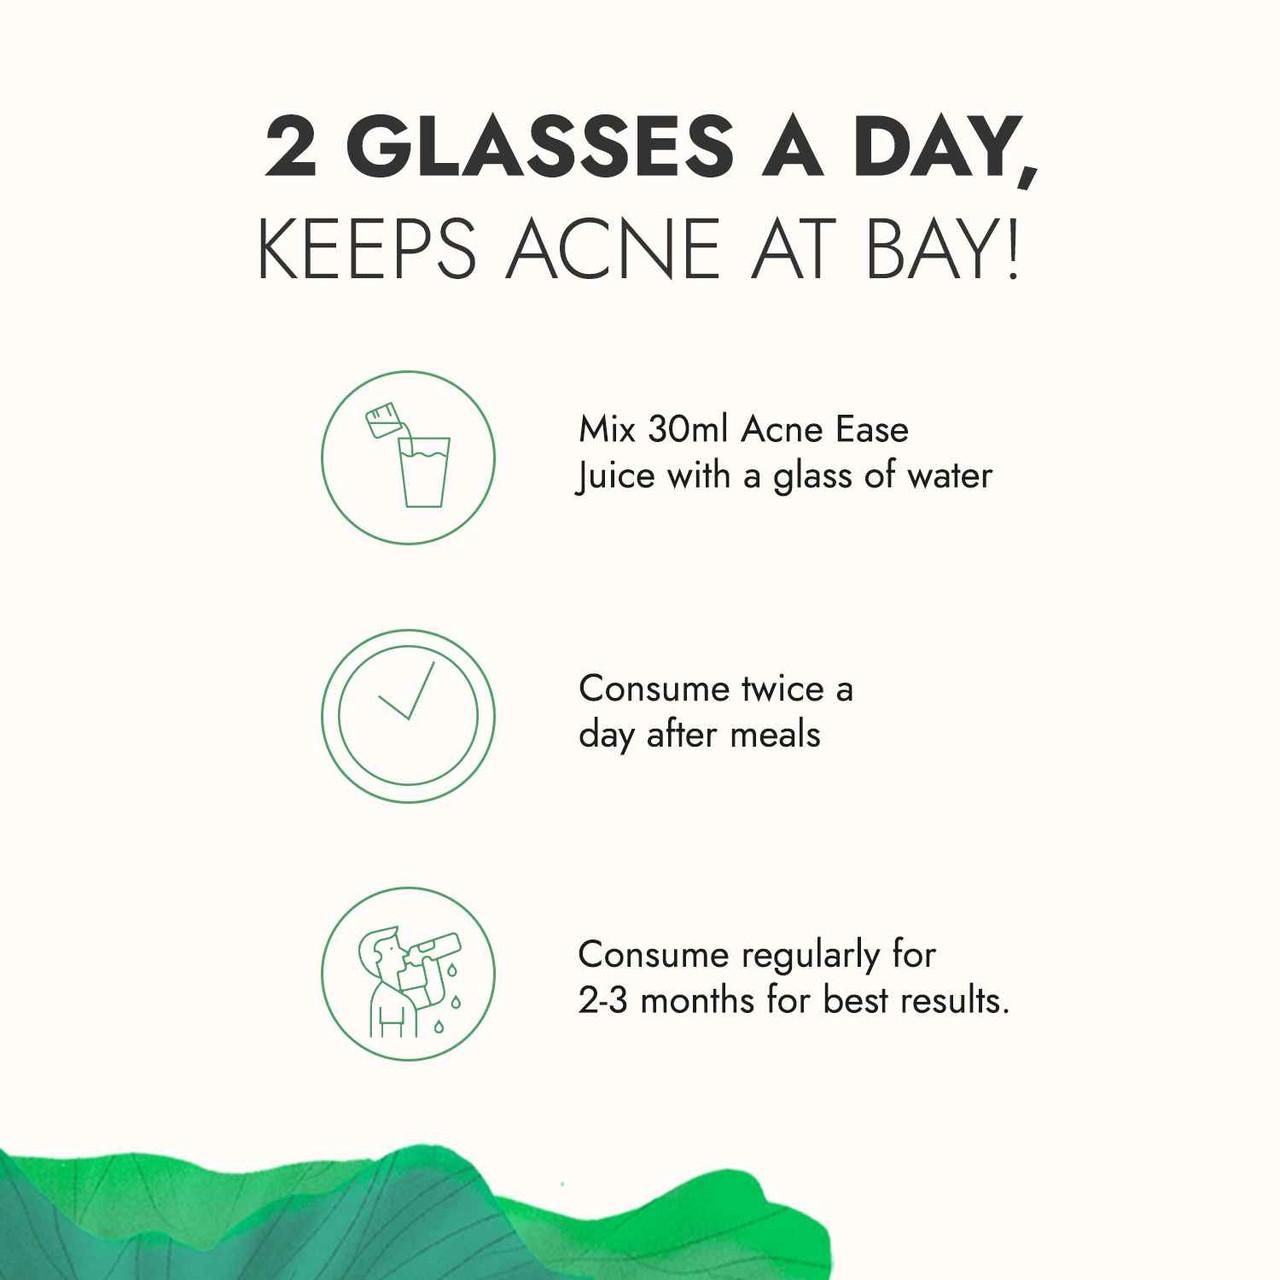 Acne Ease Juice